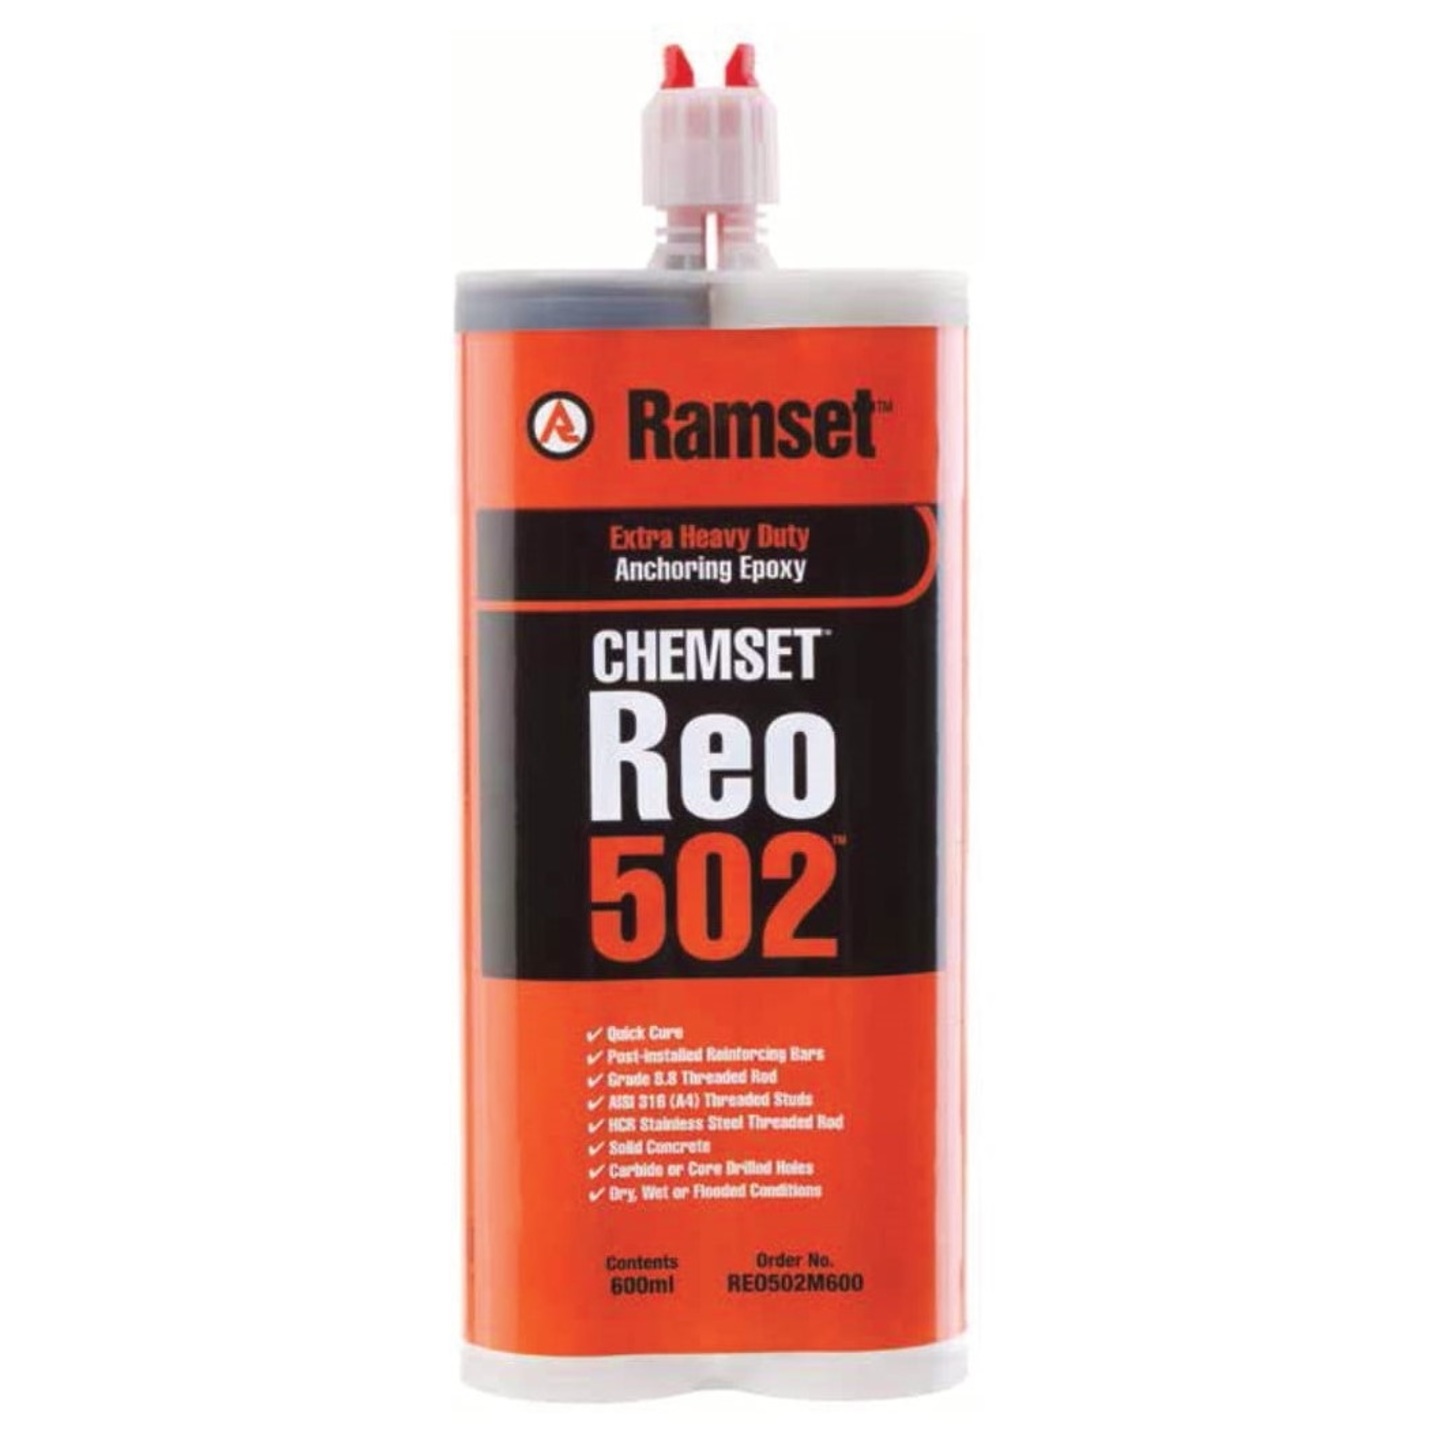 Ramset High Strength Epoxy For Cracked And Non-Concrete